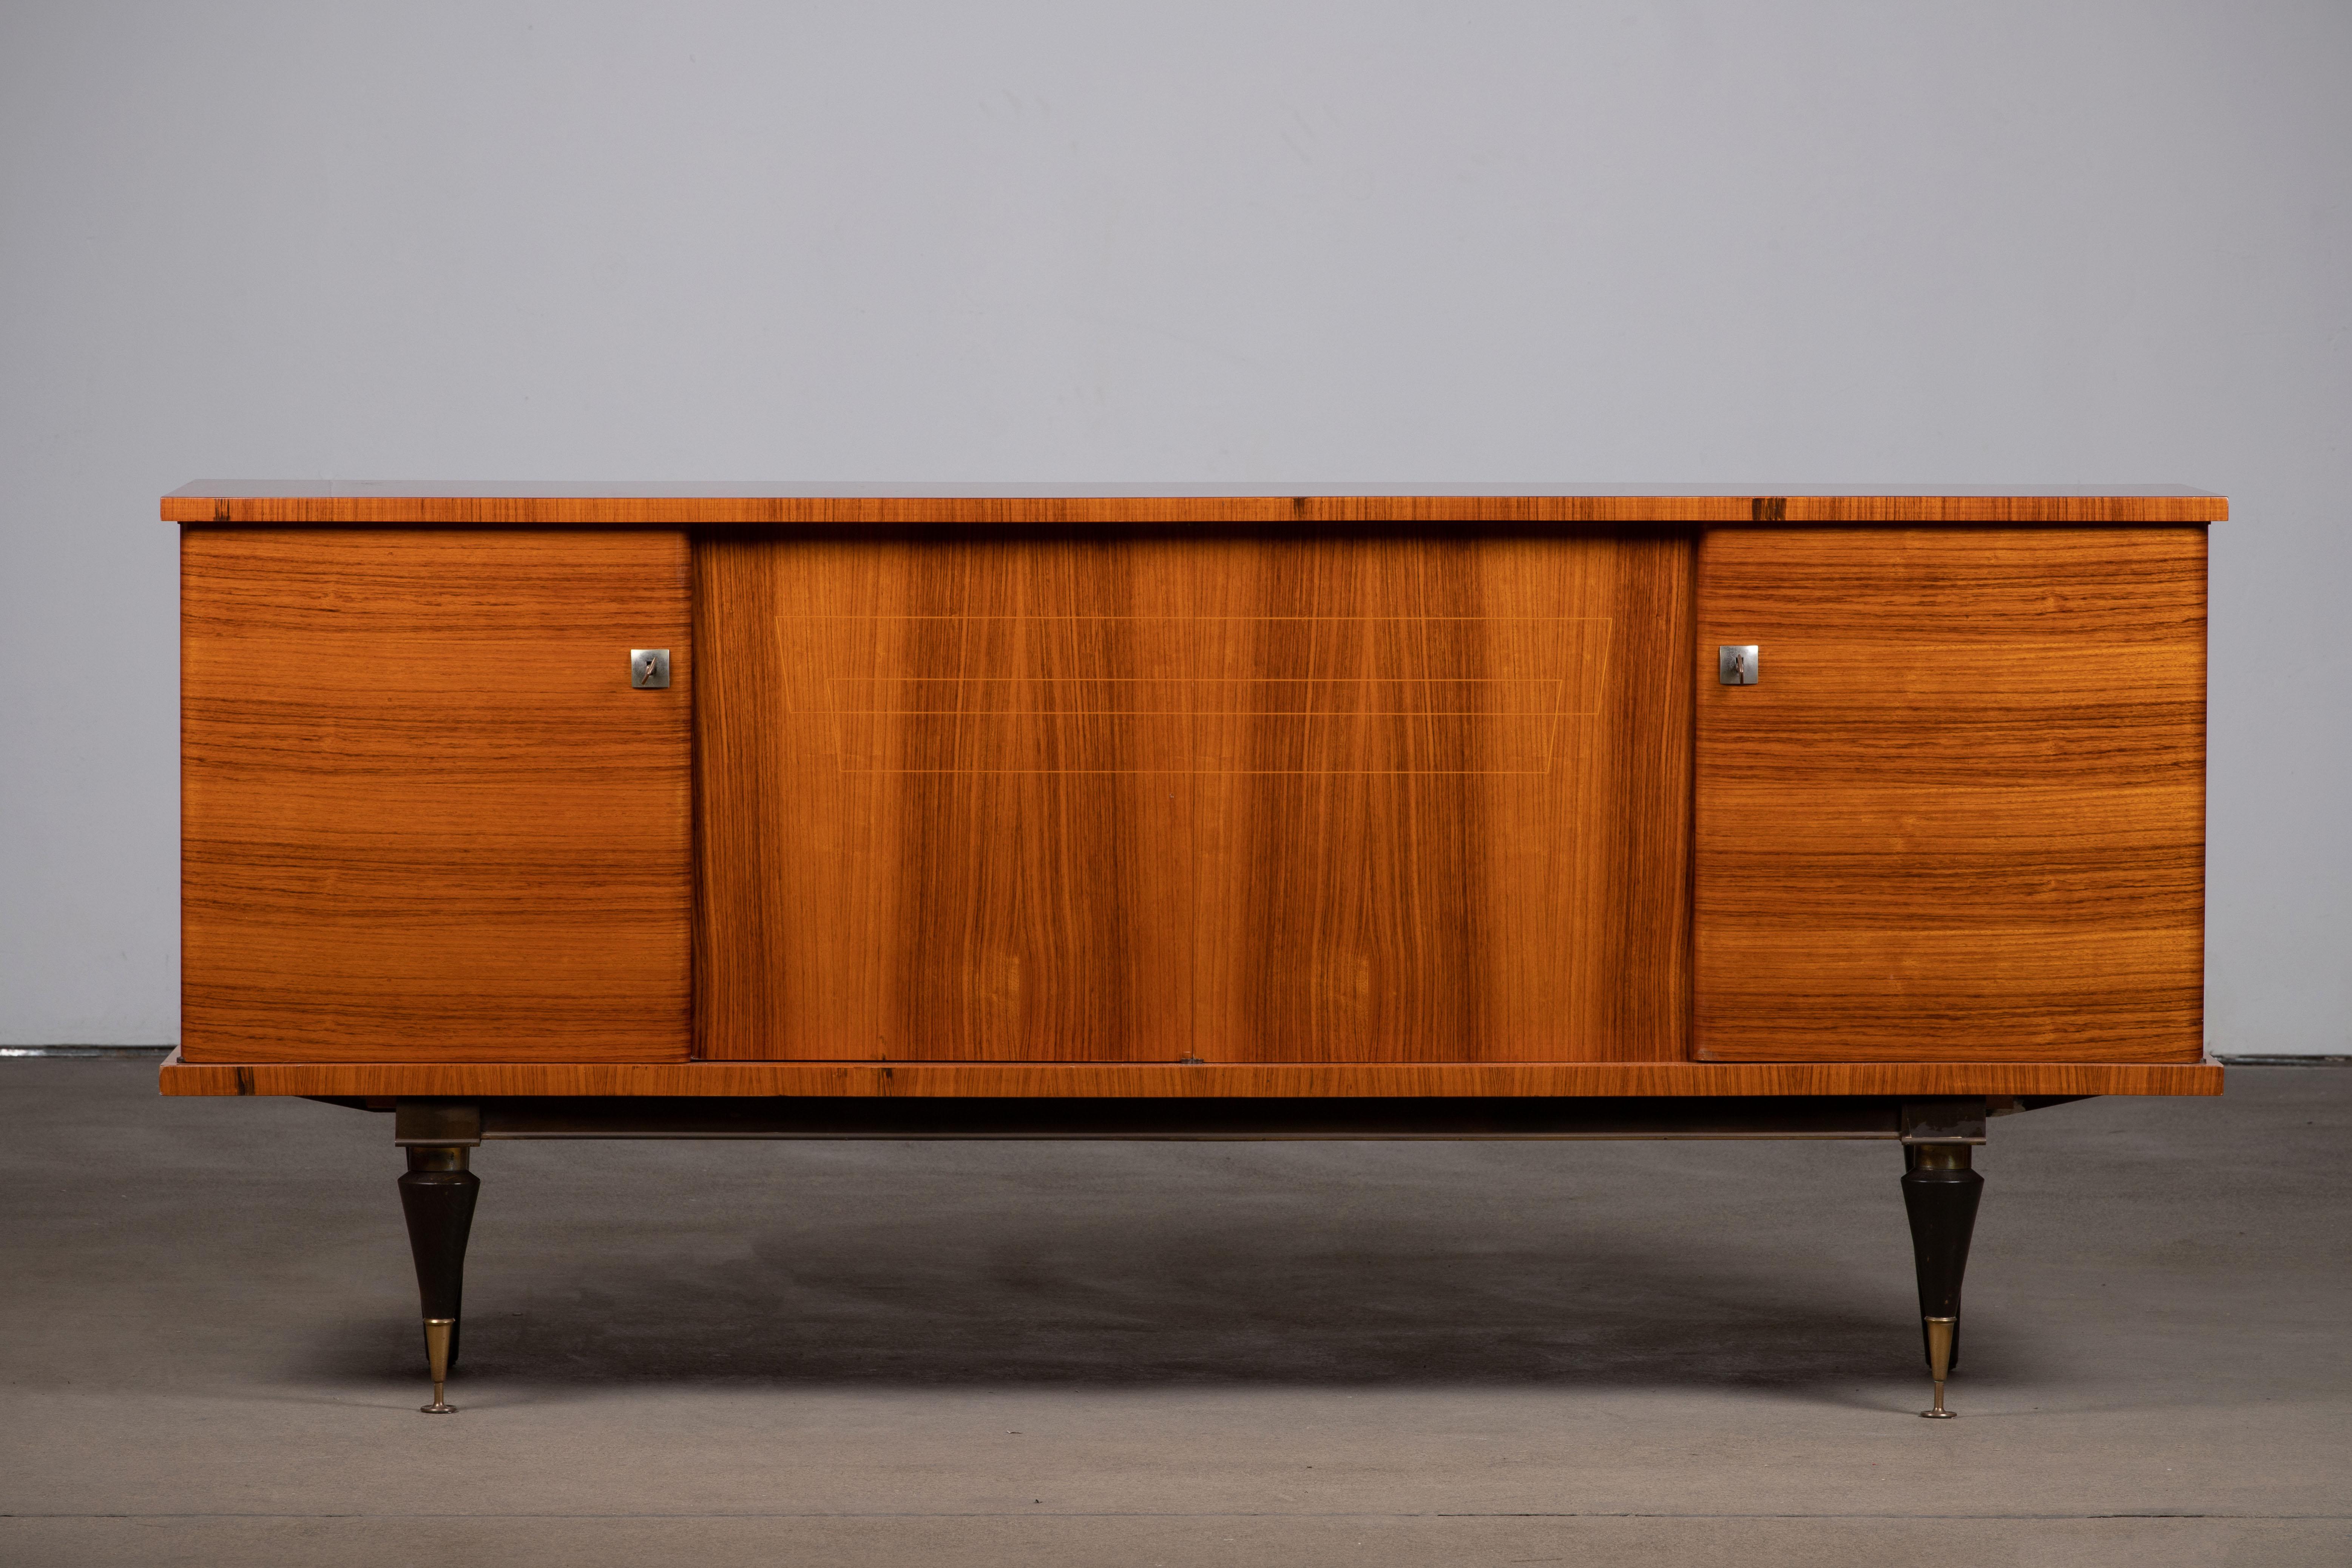 French Art Deco sideboard, credenza, with bar cabinet. The sideboard features stunning Macassar wood grain and rich pattern. It offers ample storage, with shelves and a column of drawers. The case rests on tall tapered legs with brass details. A